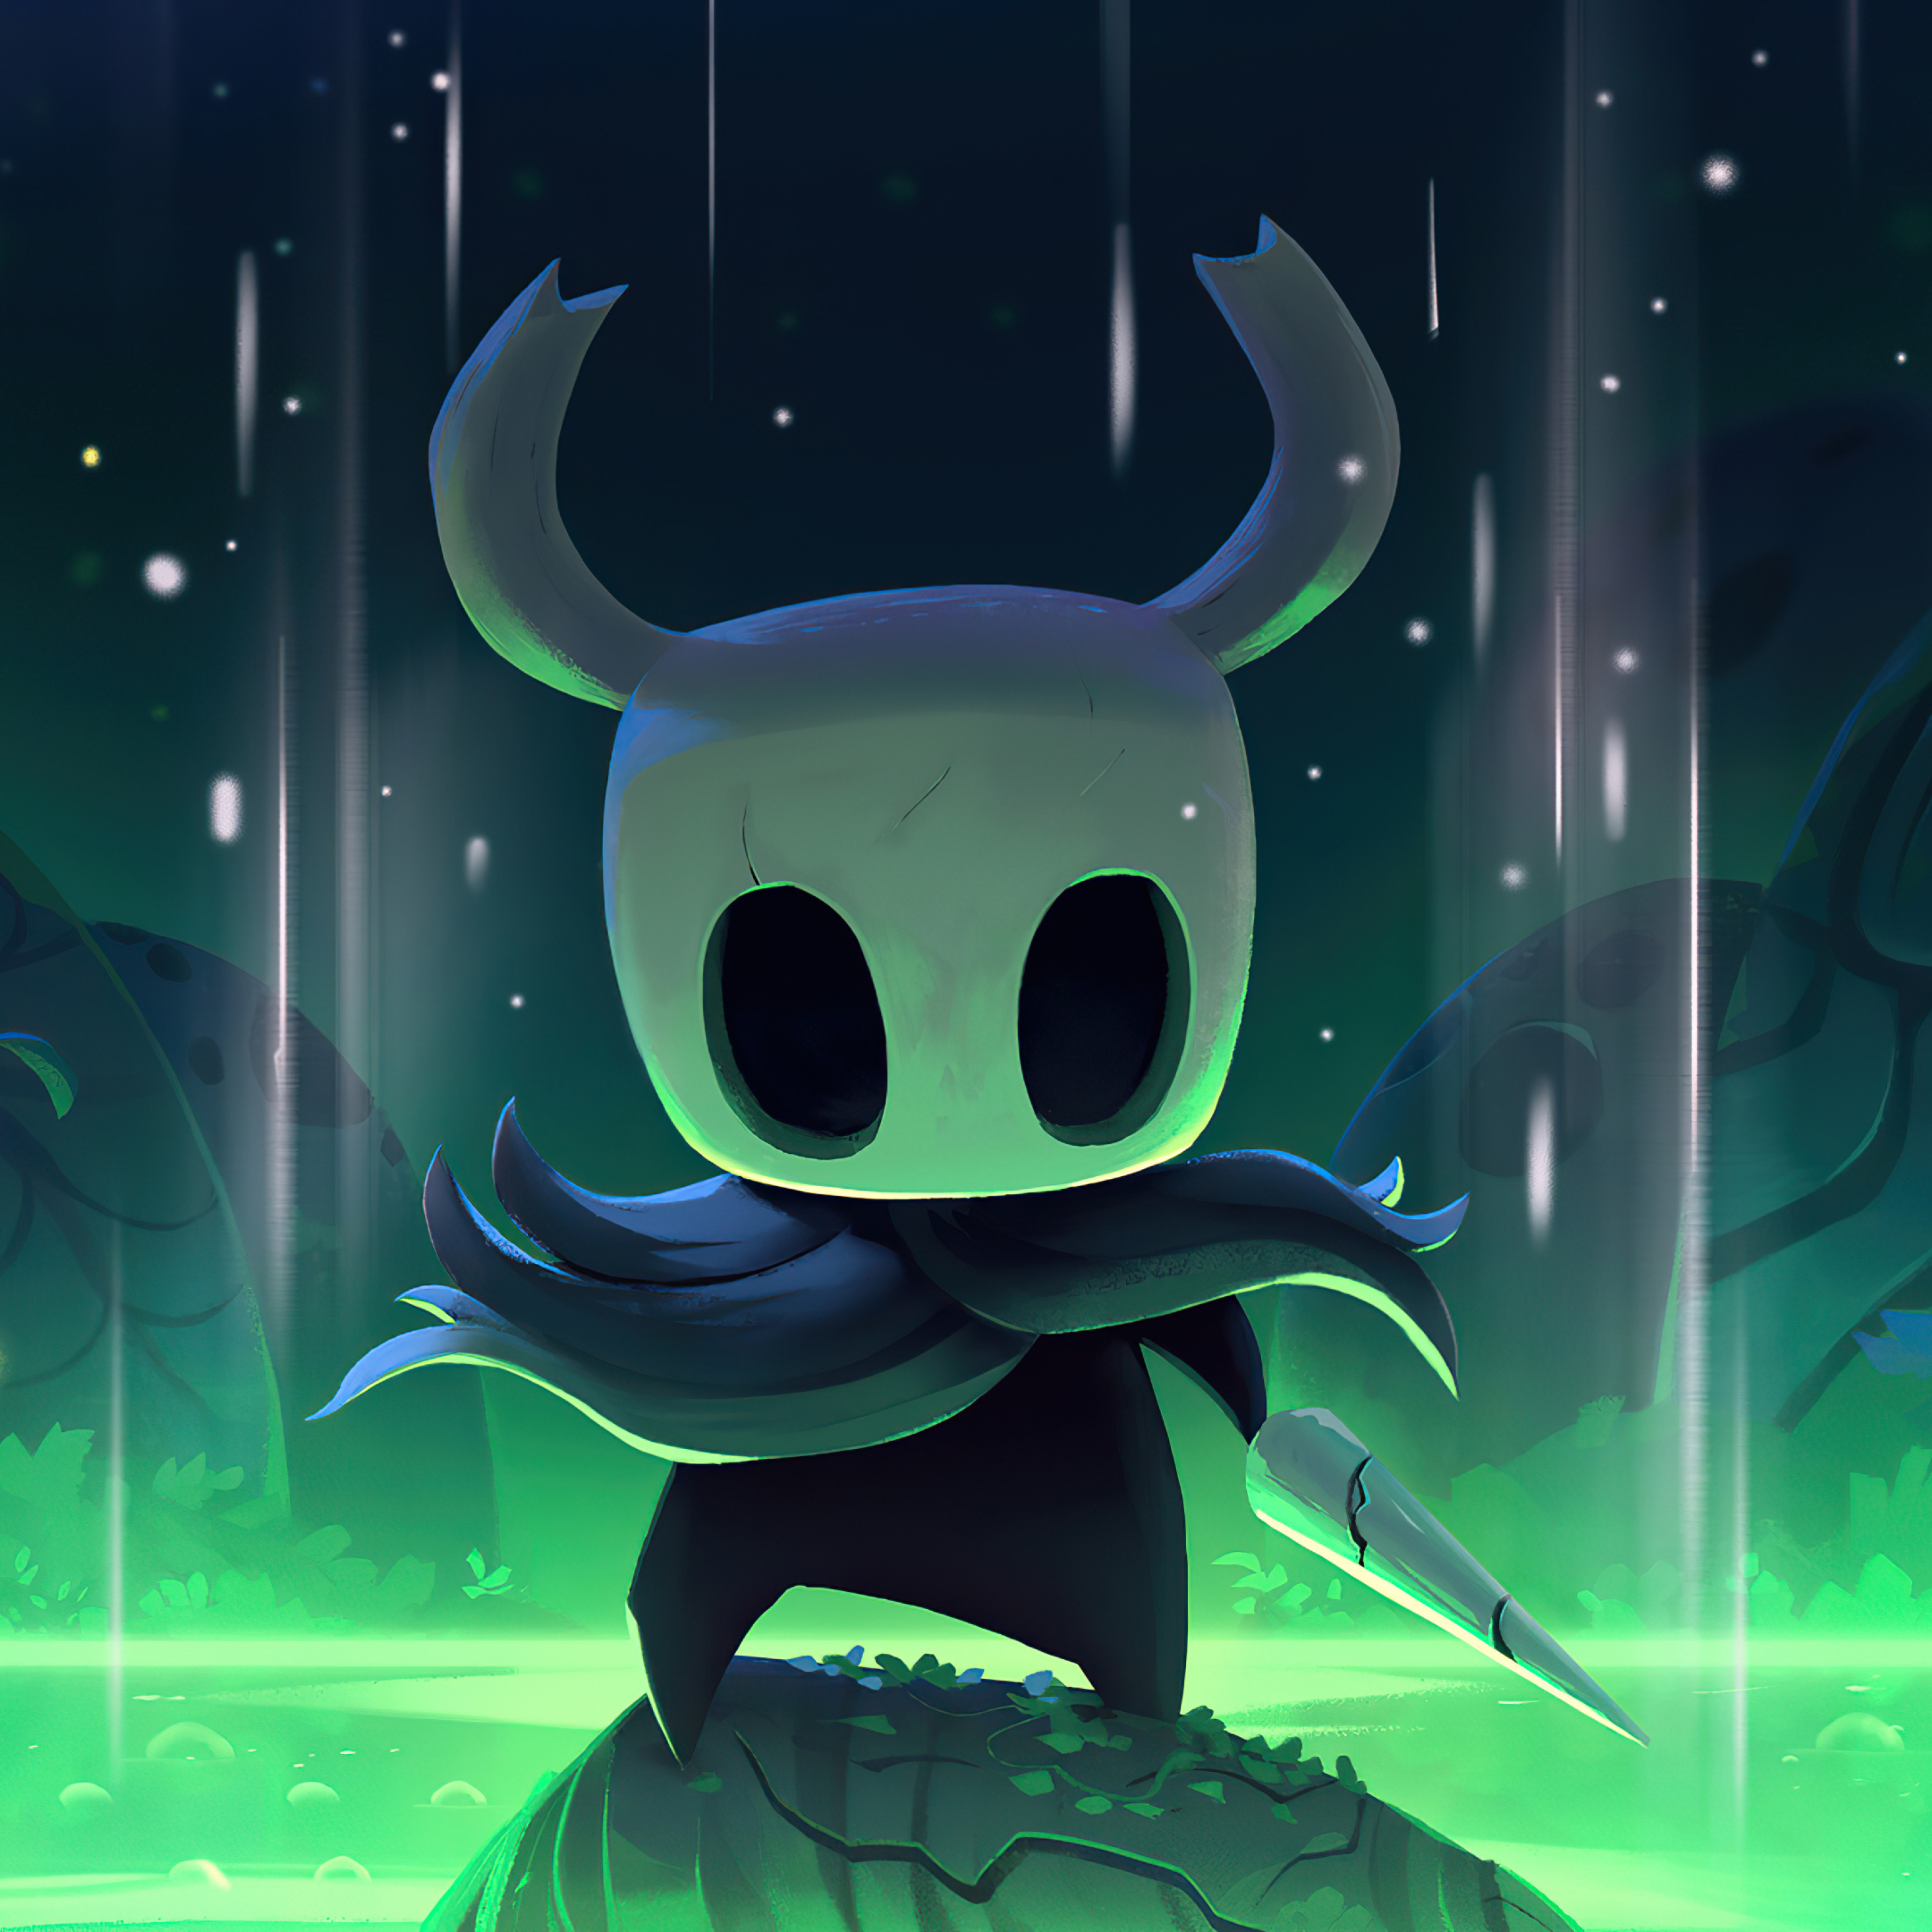 hollow knight animated wallpaper